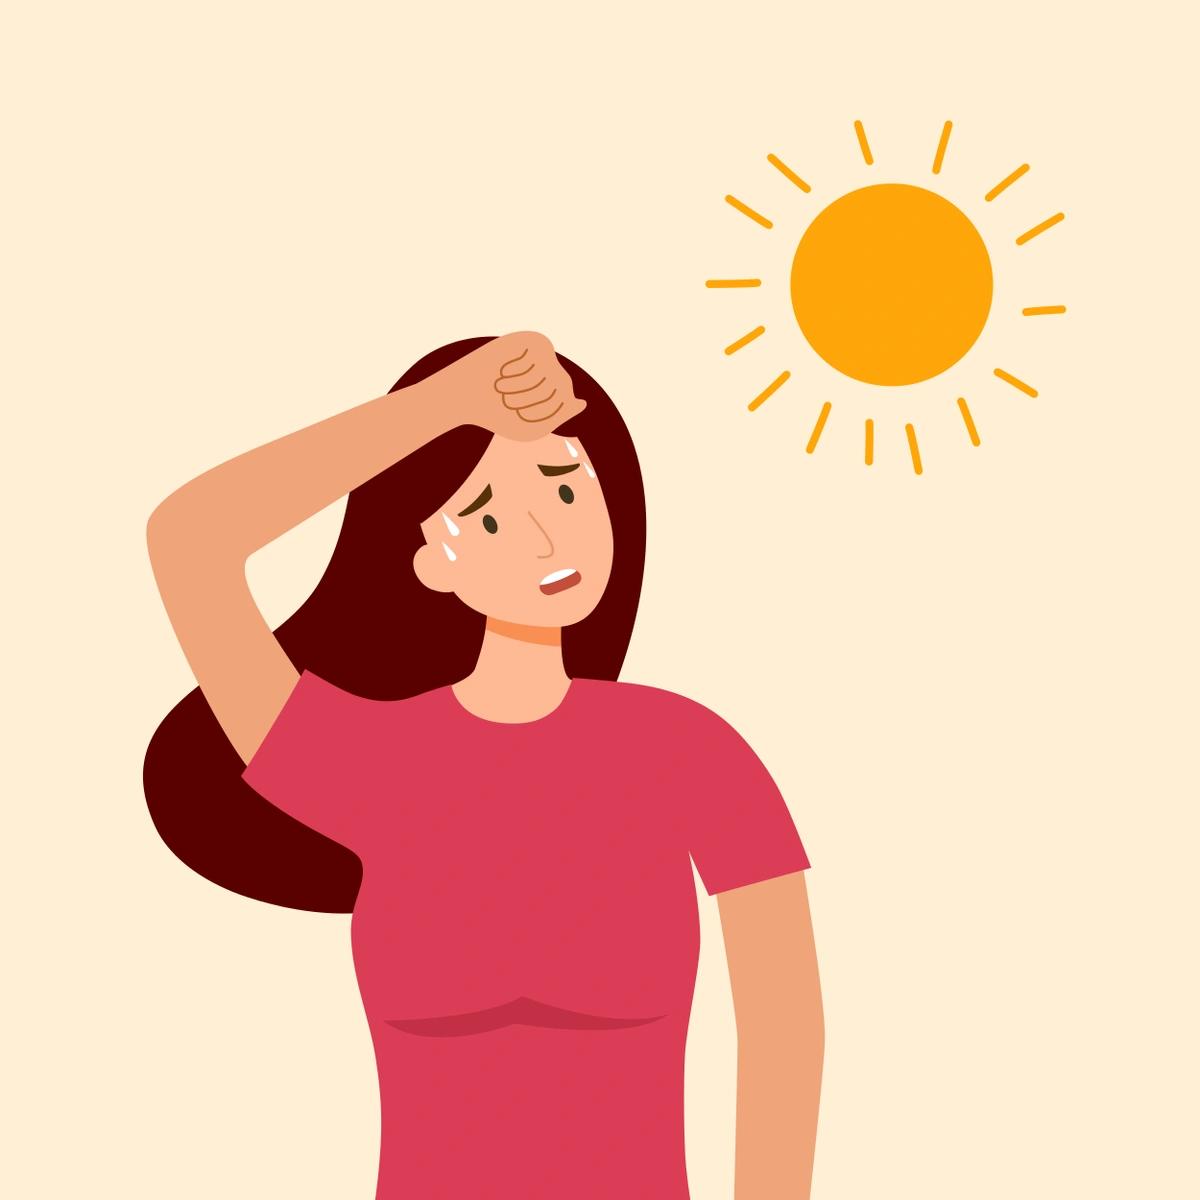 An illustration of a woman looking at the hot sun, wiping her brow as sweat rolls down her face